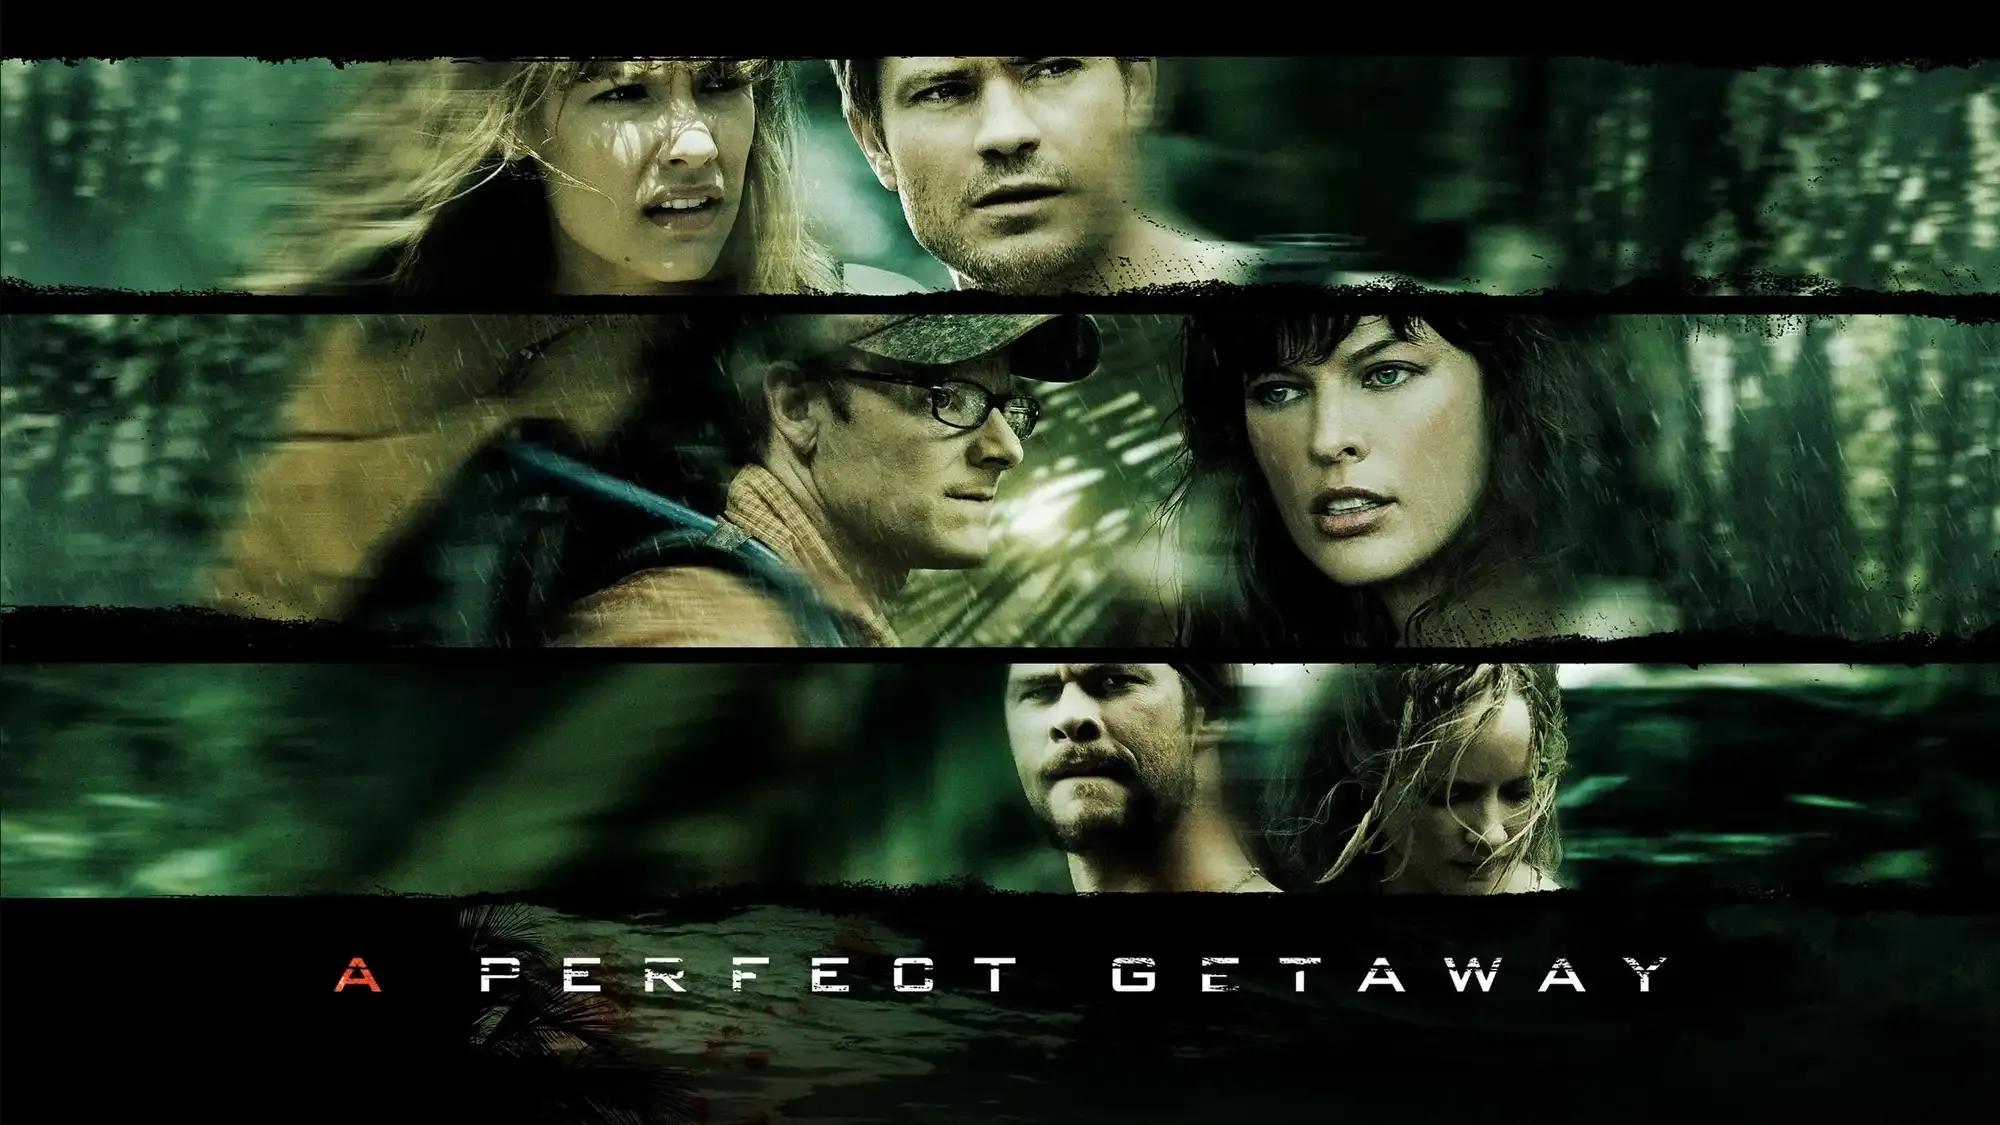 A Perfect Getaway movie review